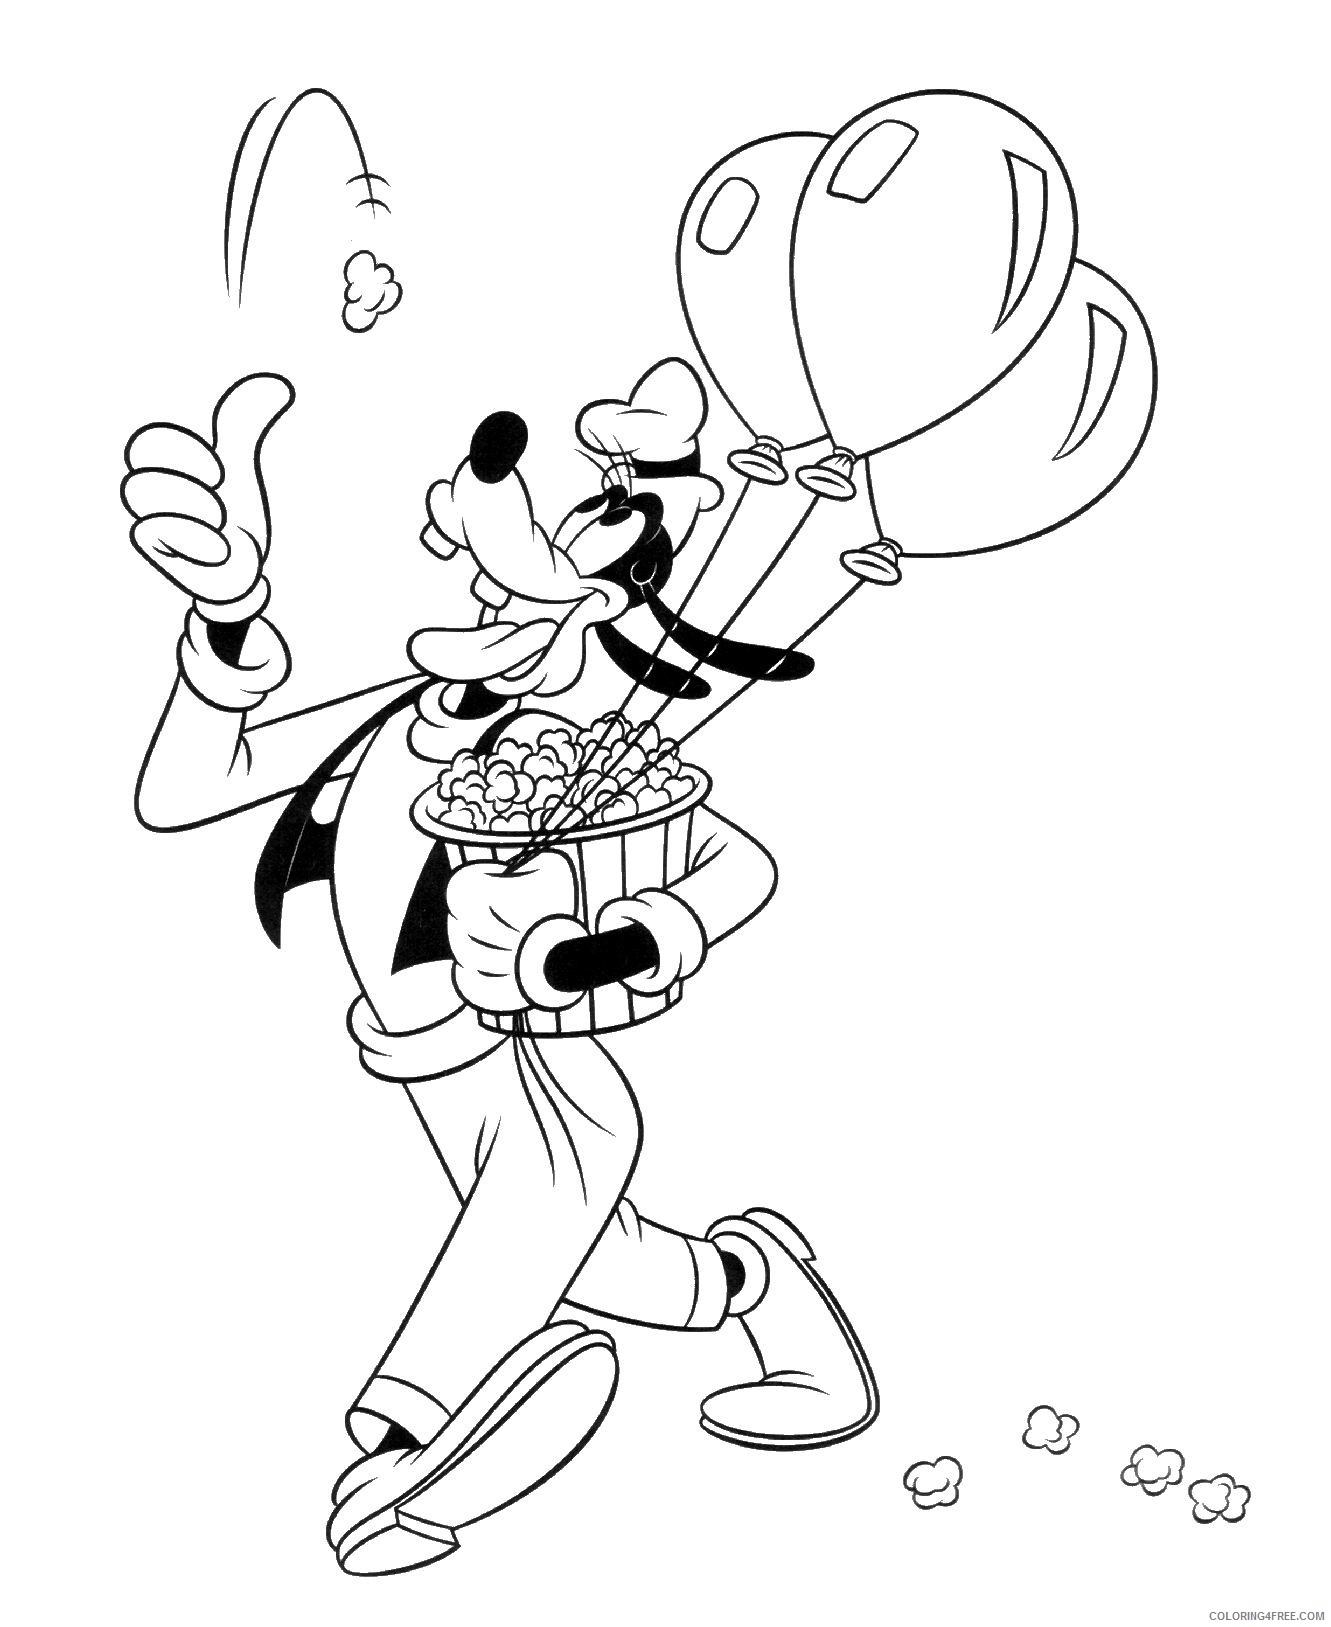 goofy coloring pages eating popcorn Coloring4free